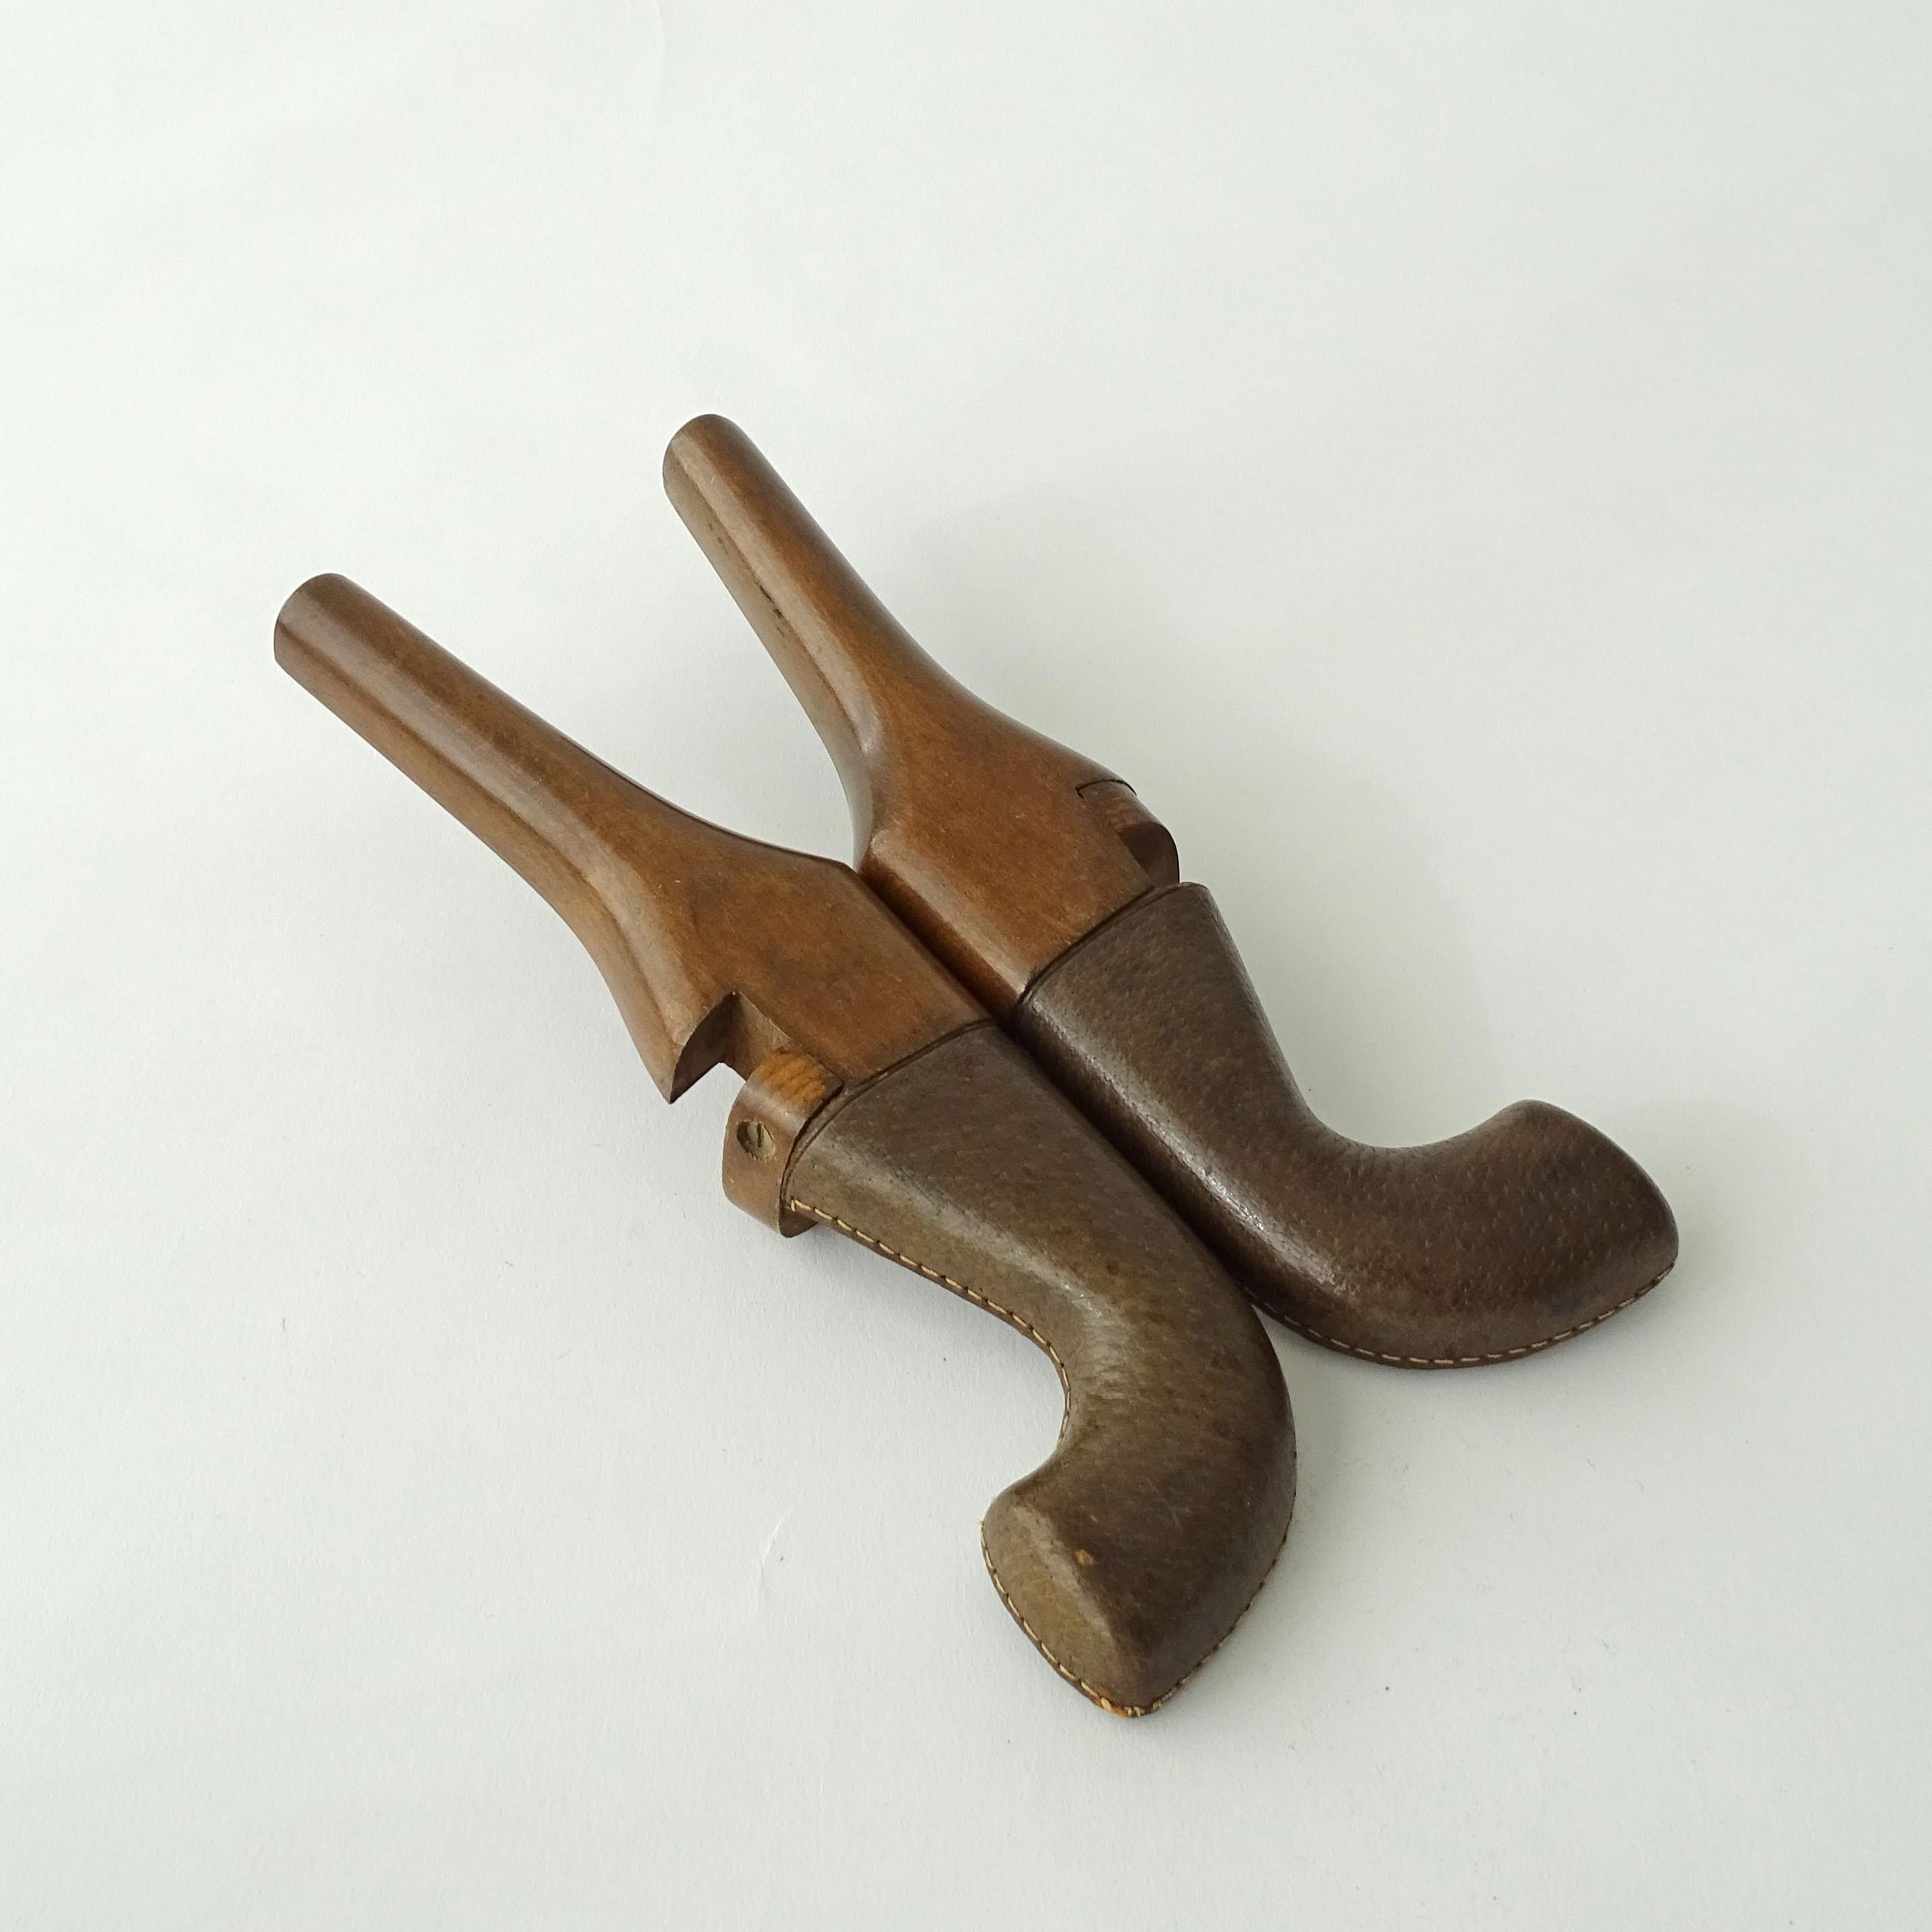 Unusual and early Gucci gun shaped foldable boot jack, Italy 1950s